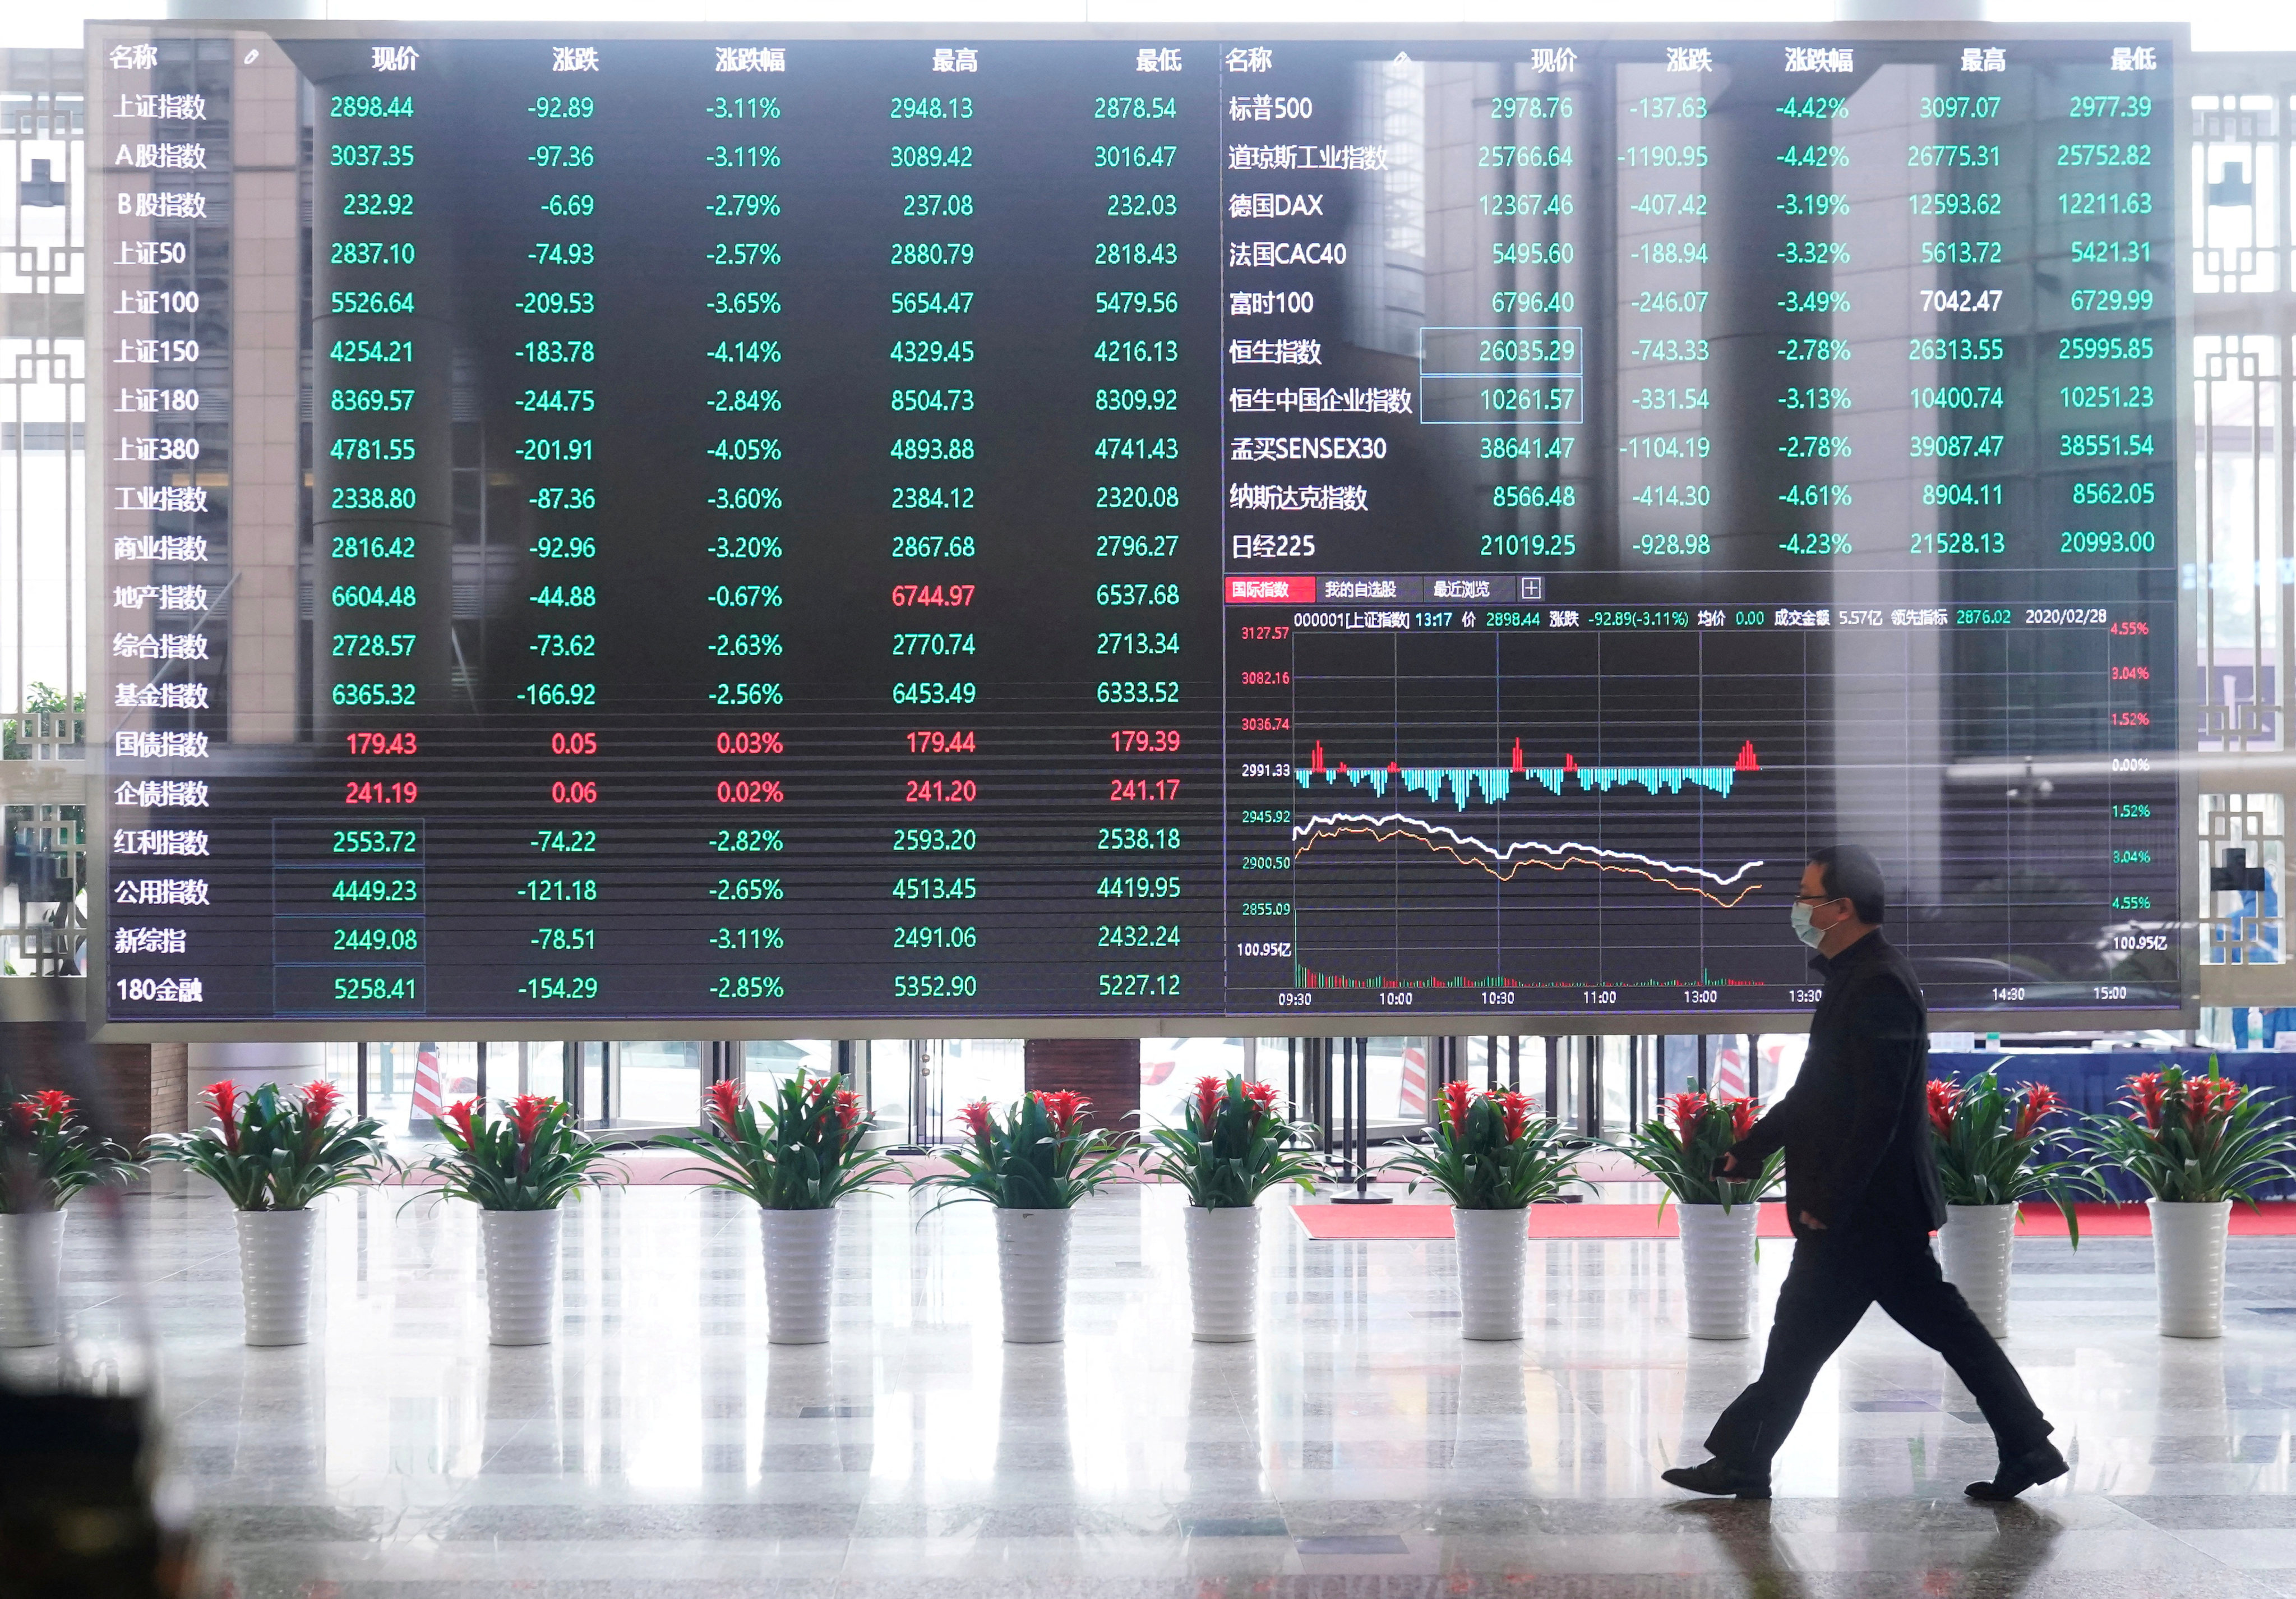 A view of the stock ticker board inside the Shanghai Stock Exchange building in the Pudong financial district in Shanghai, China. Photo: Reuters